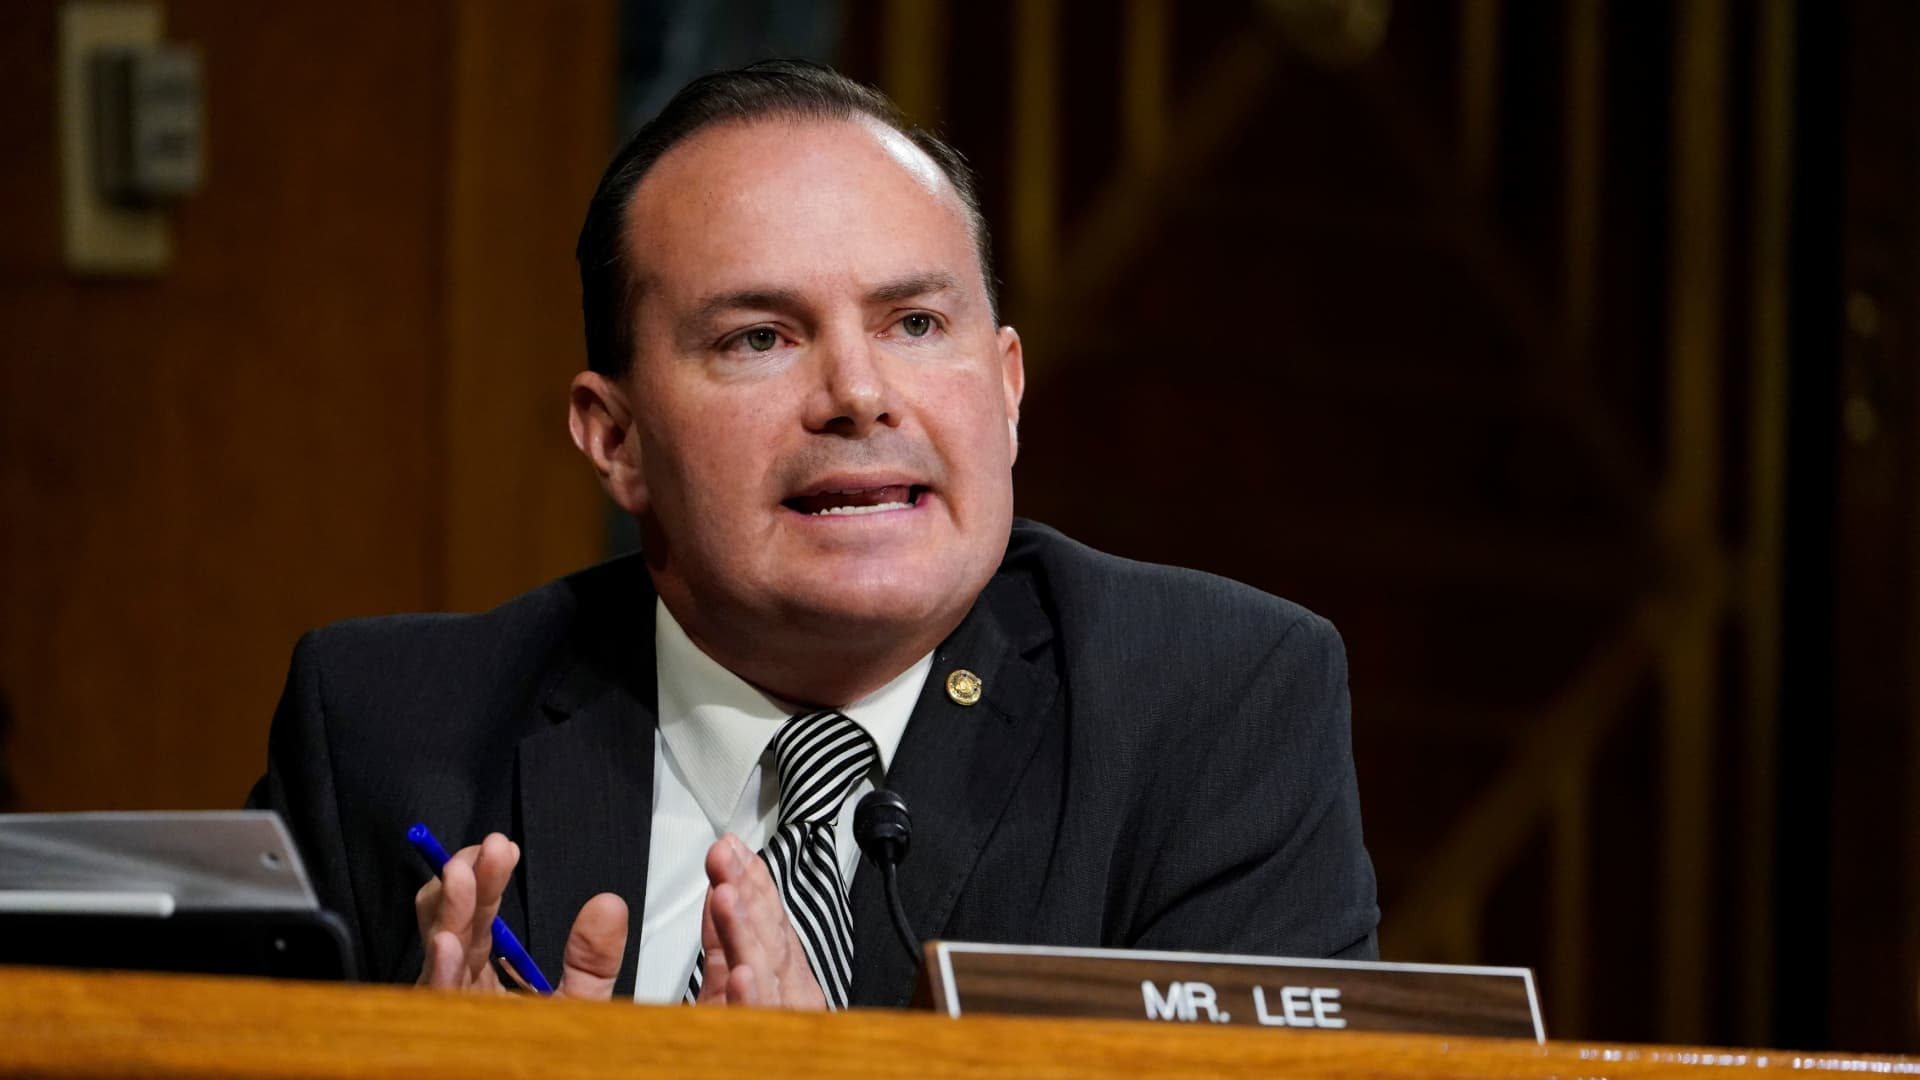 U.S. Sen. Mike Lee, R-Utah speaks during a Senate Judiciary Committee hearing on the FBI investigation into links between Donald Trump associates and Russian officials during the 2016 U.S. presidential election, on Capitol Hill in Washington, U.S., November 10, 2020.